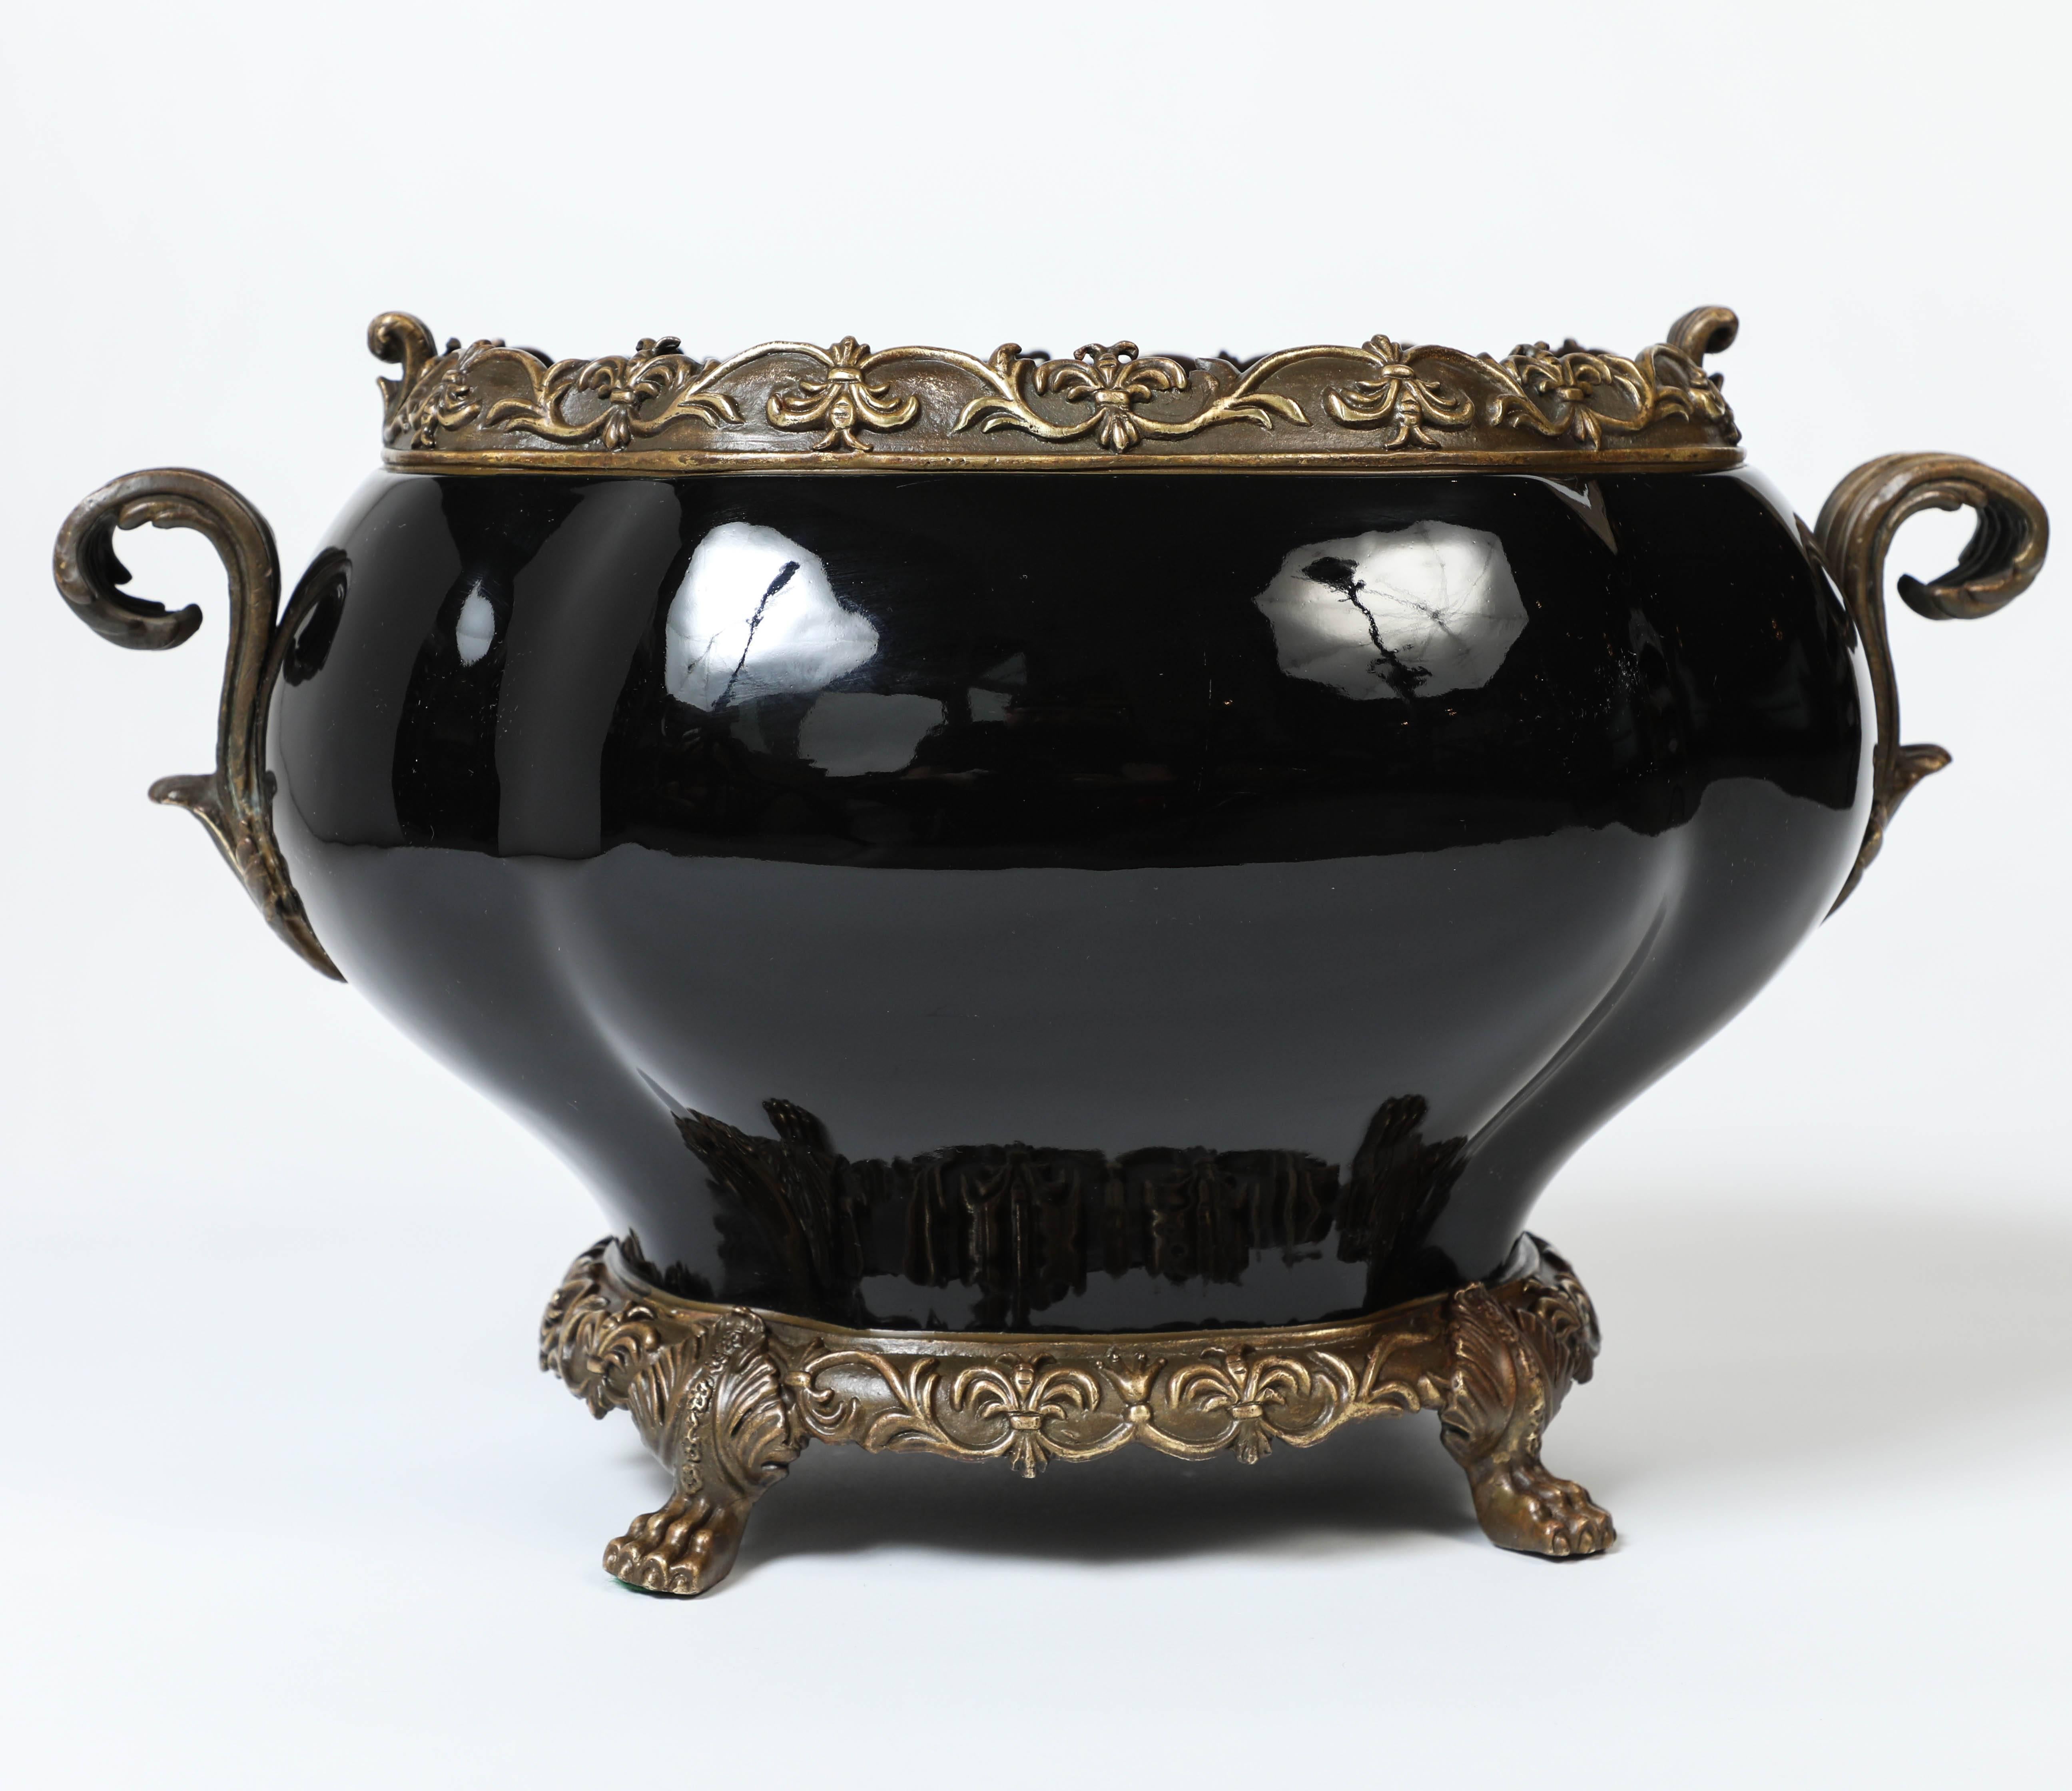 Vintage black high gloss ceramic and brass claw-footed compote / tureen.